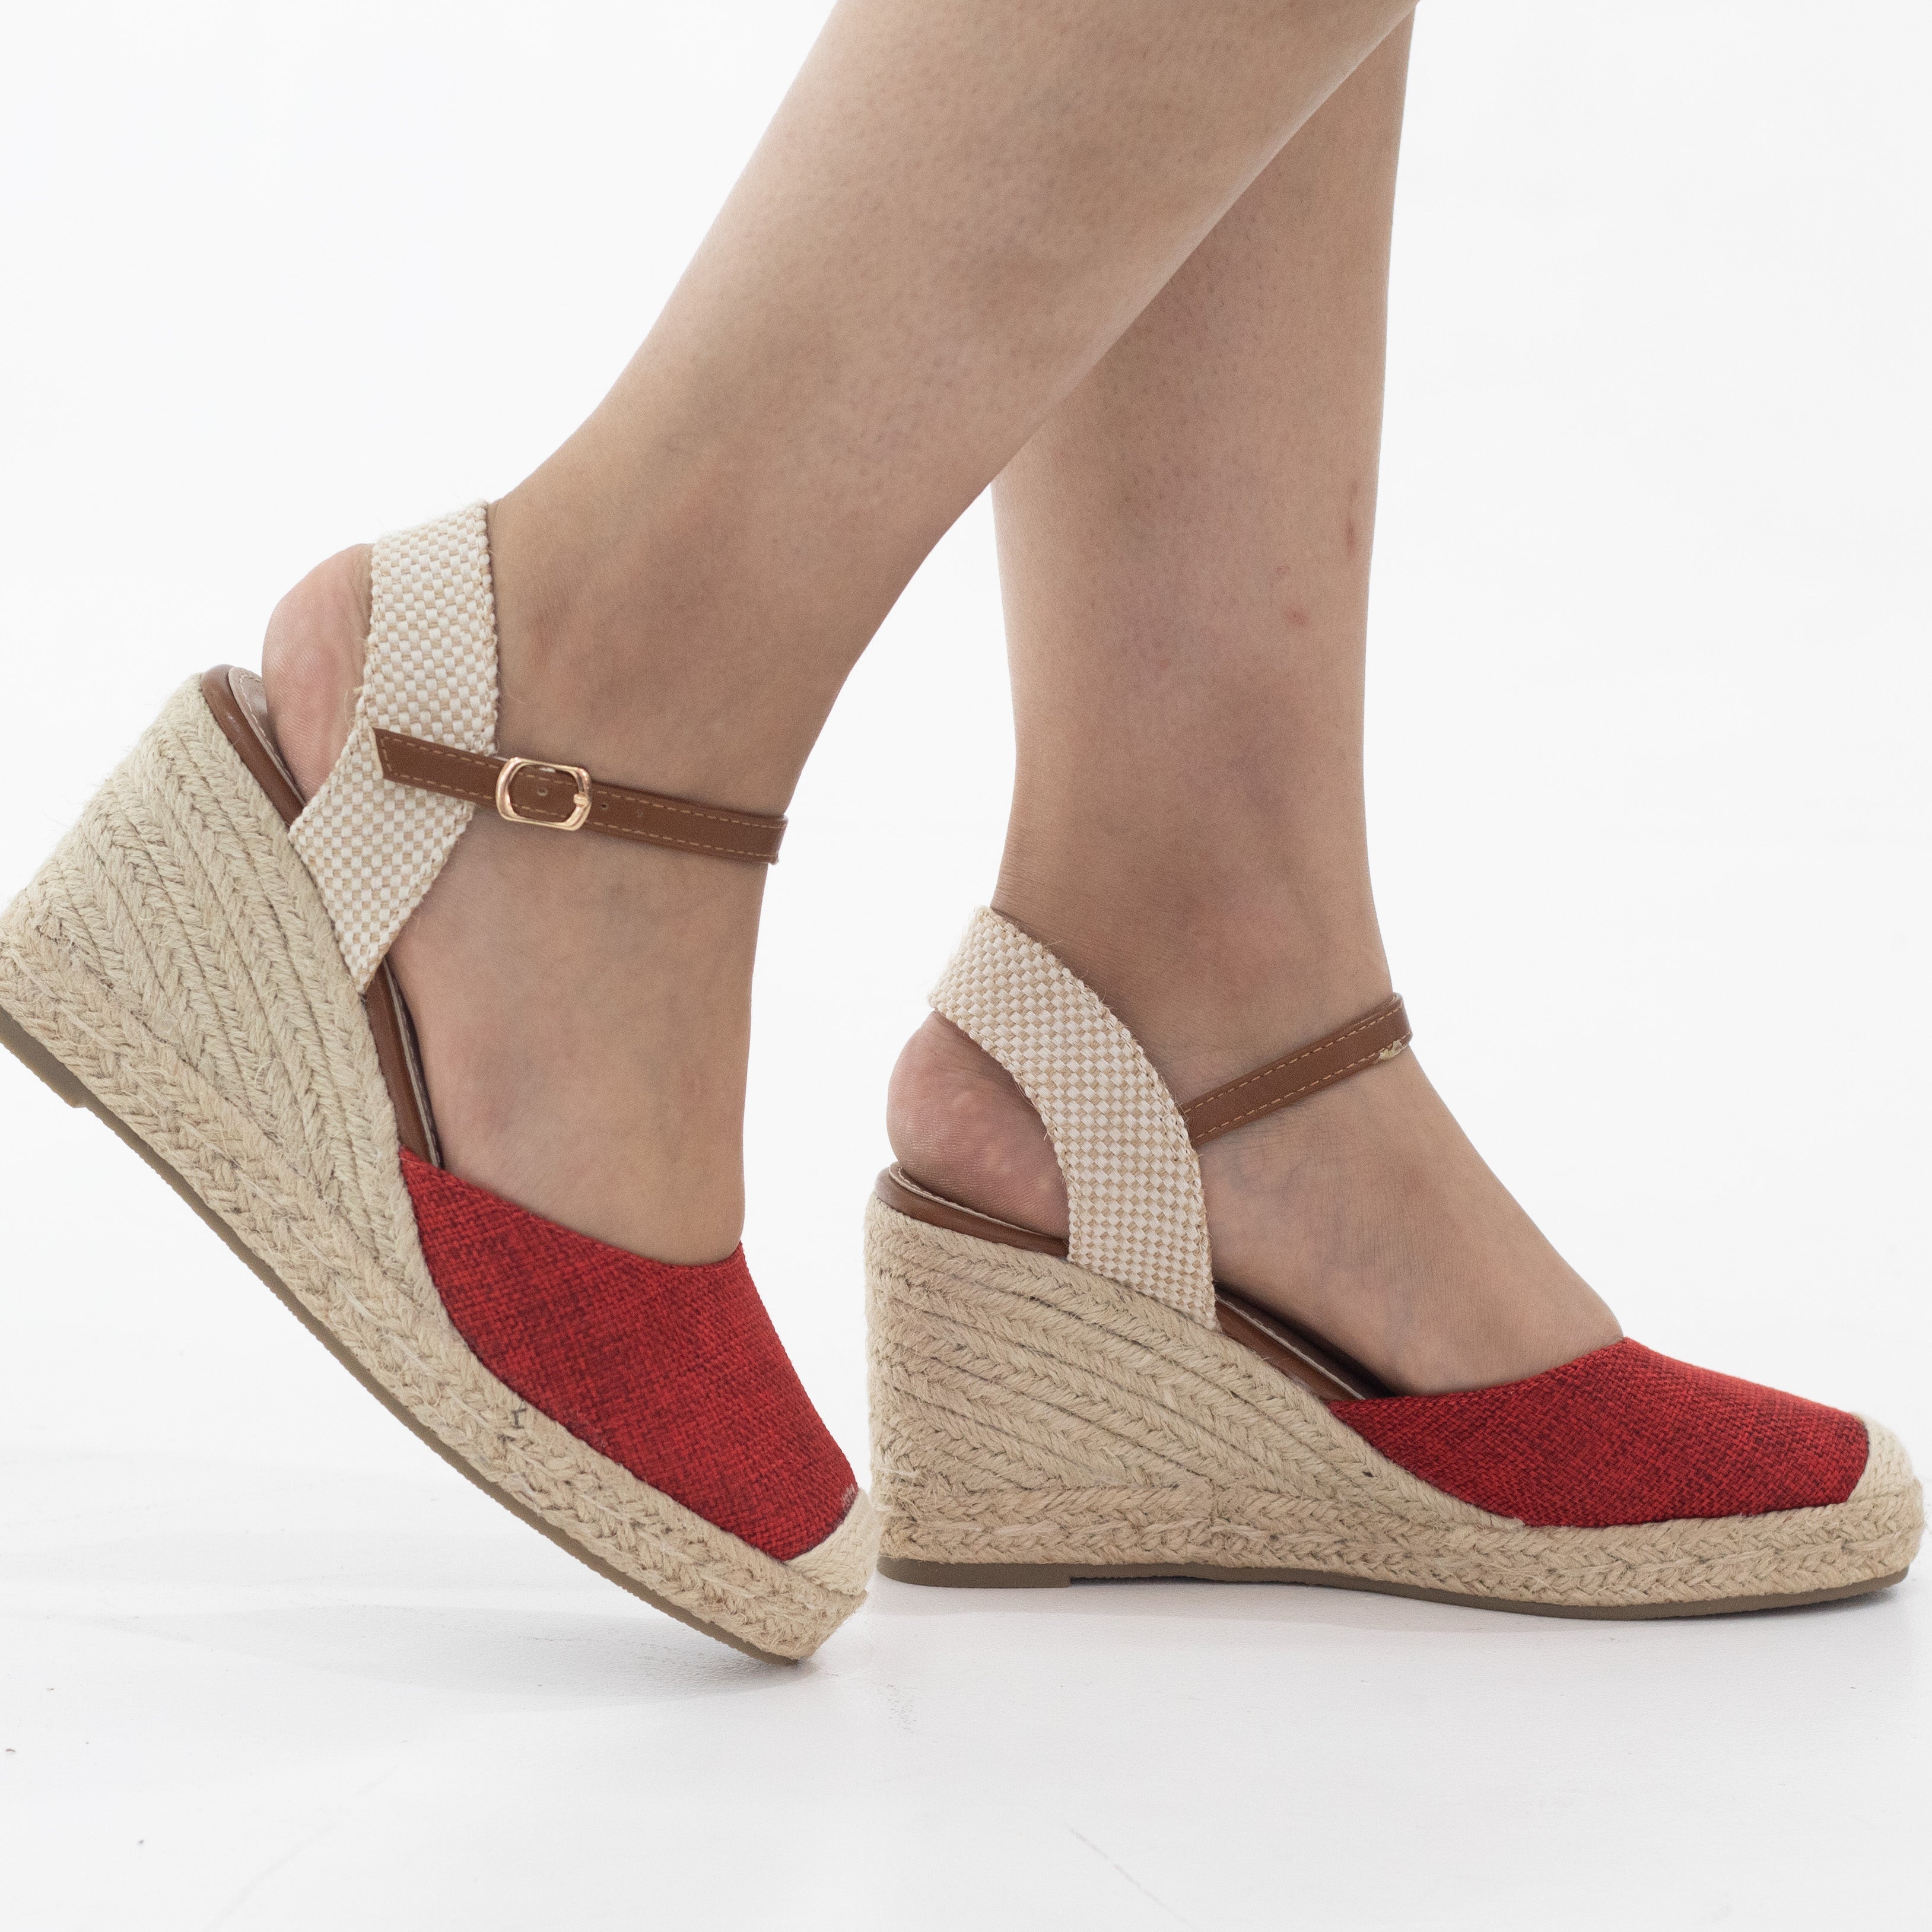 Red espadrille woven closed toe 8cm wedge heel sandals hitomi